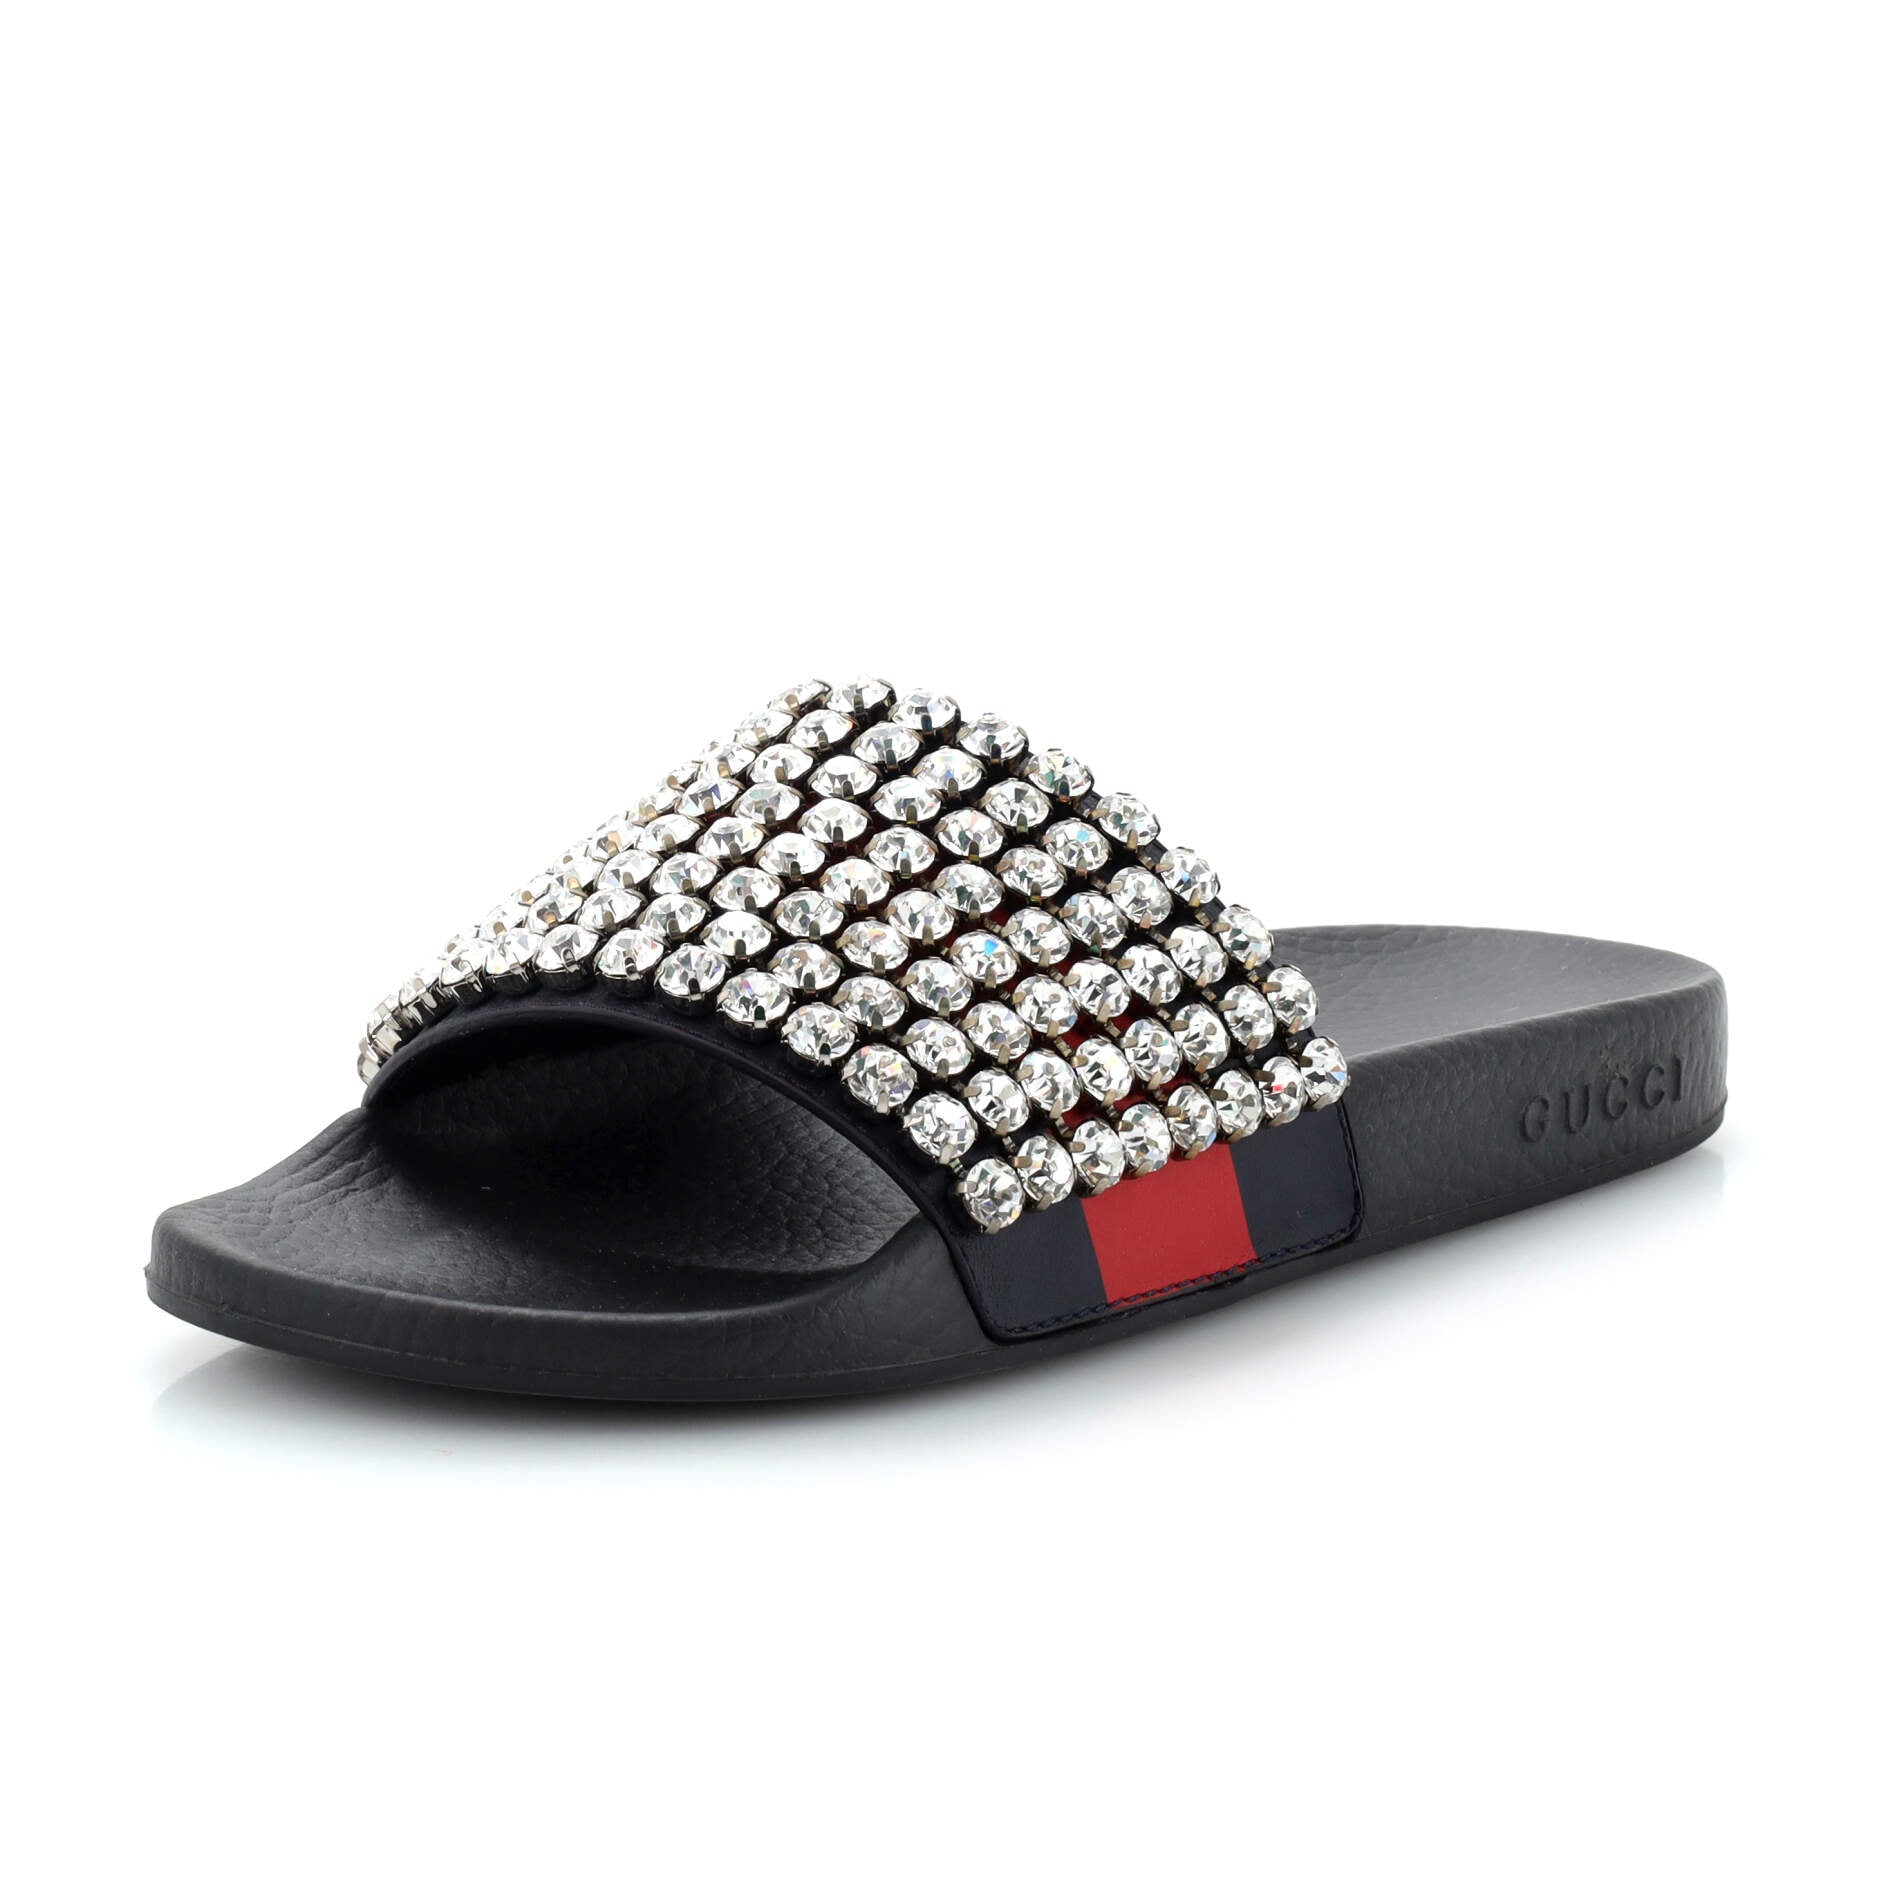 Women's Web Slide Sandals Leather and Rubber with Crystals